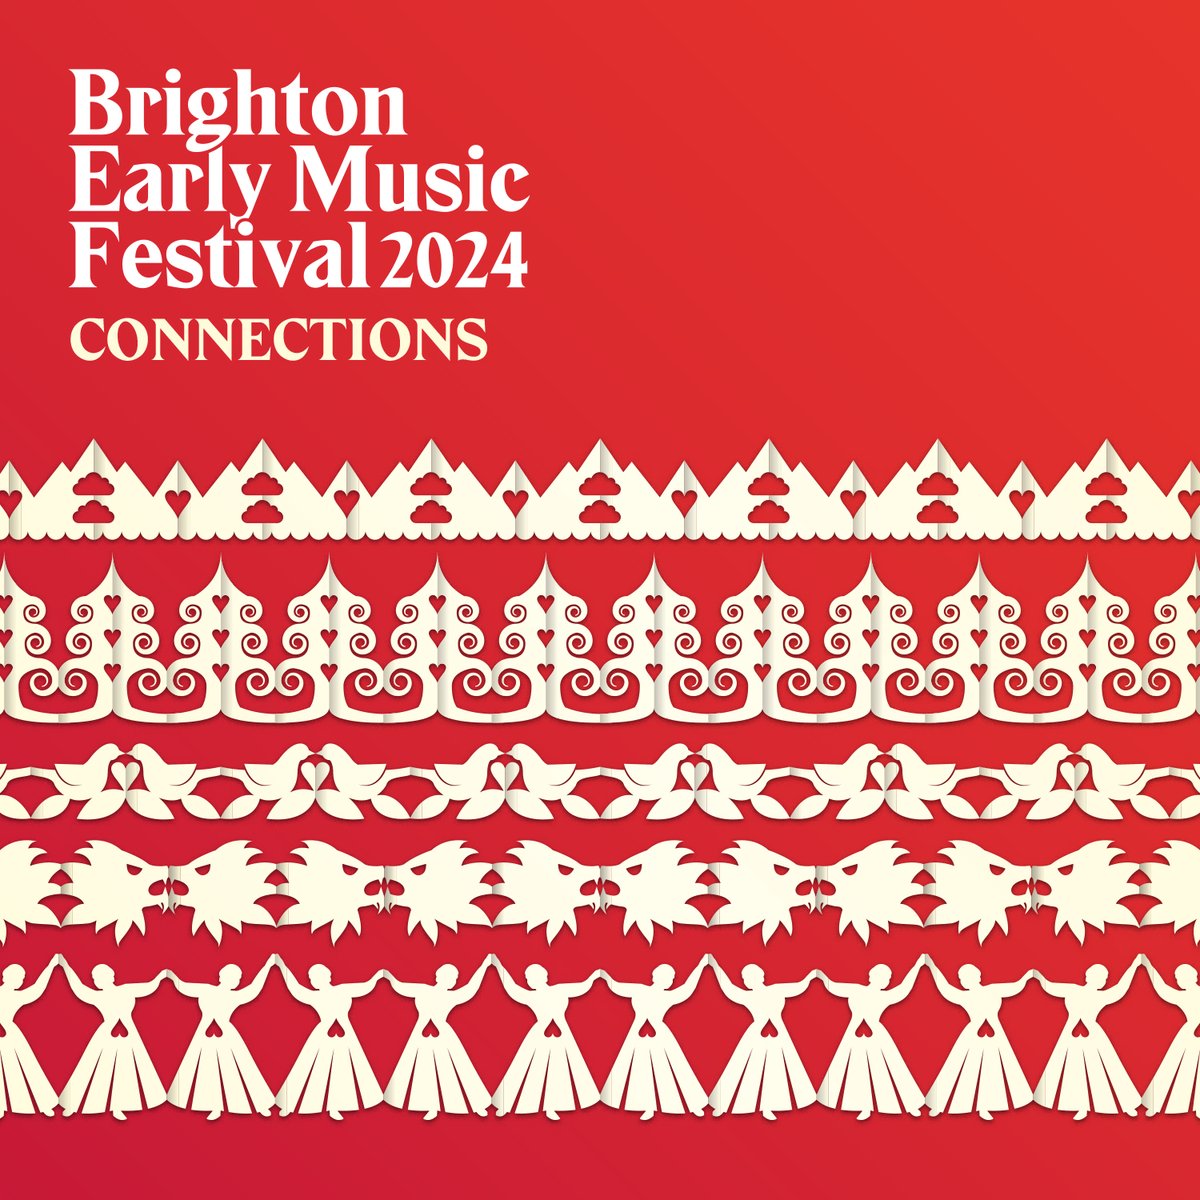 TA DA! Here's the whole image for our 2024 Festival with the theme of CONNECTIONS, designed by super graphic designer Kate Benjamin @cardigankate. Our first event of 2024 is coming up on Saturday 4 May - see website link in bio to find out more. #imagelaunch #BREMF24 #Connections